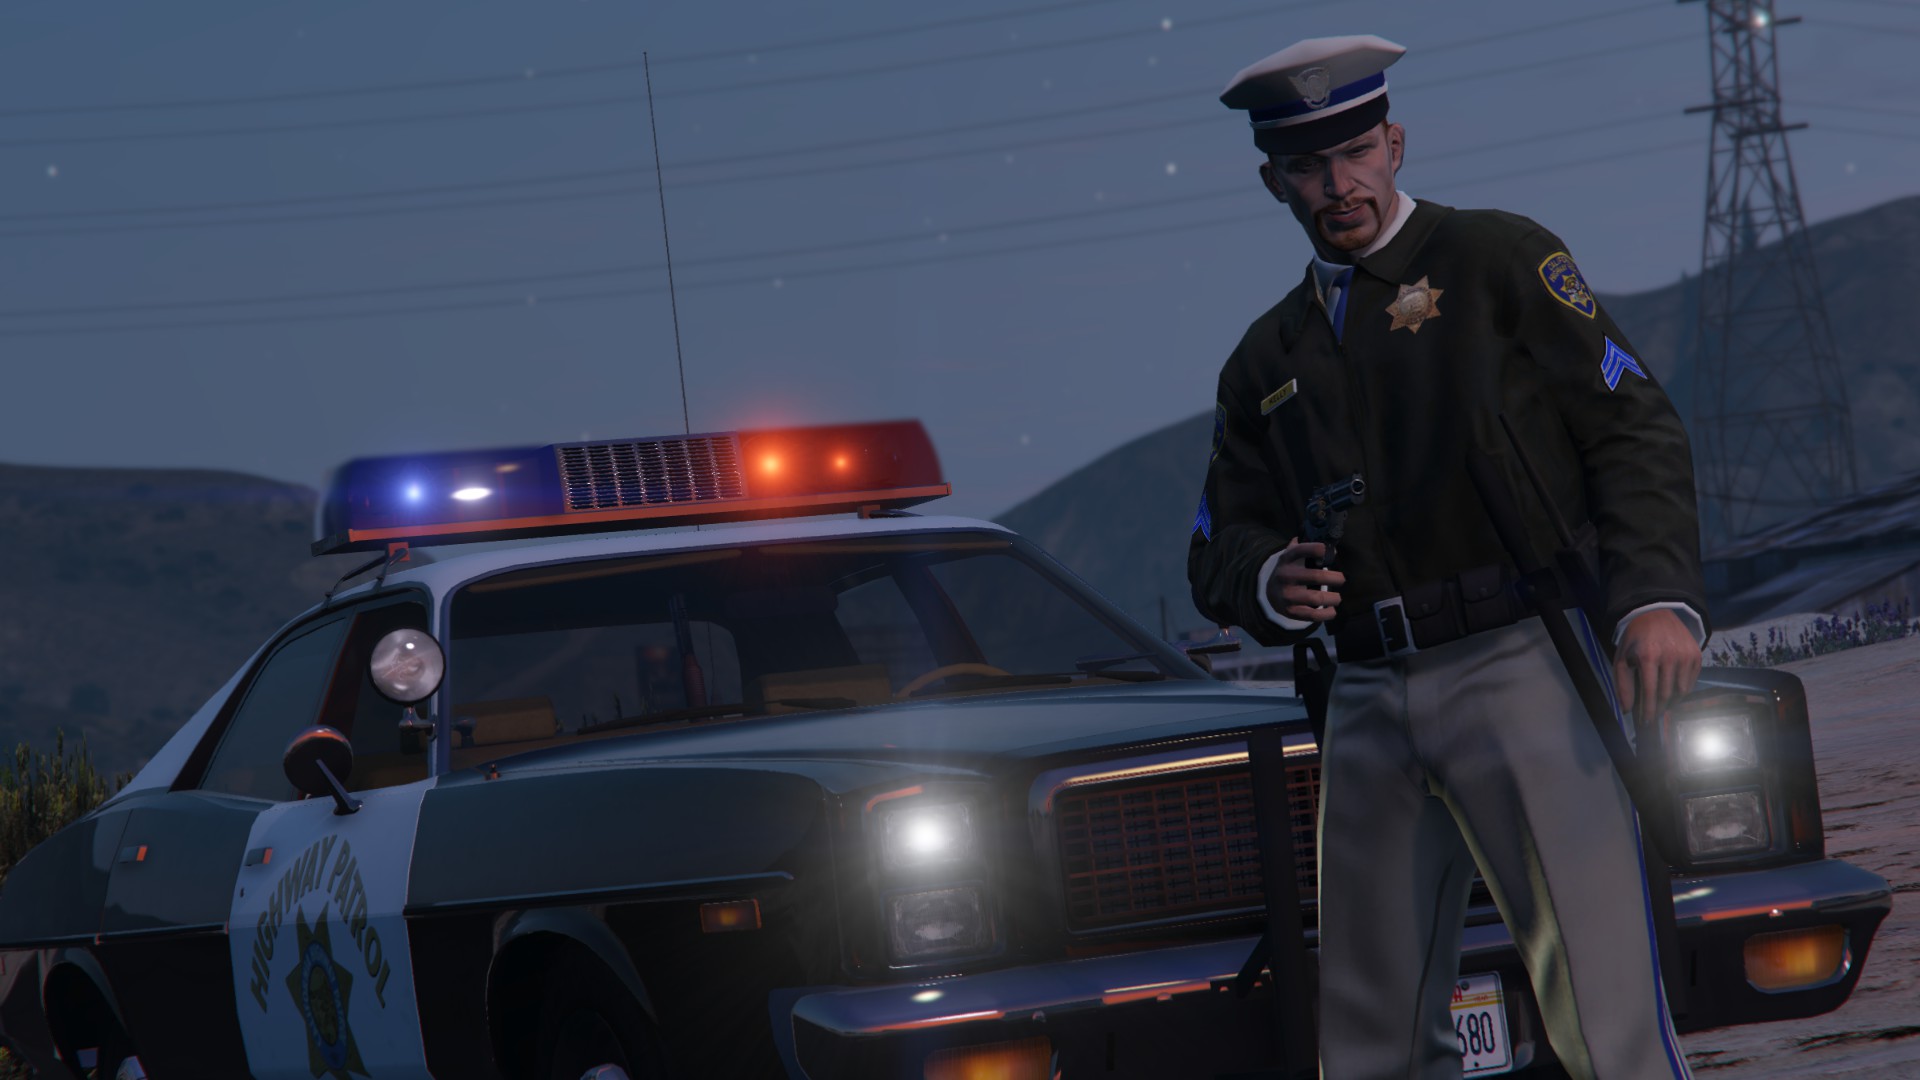 [MISC] [WIP] 1981-1990 CHP Officers | GTA5-Mods.com Forums